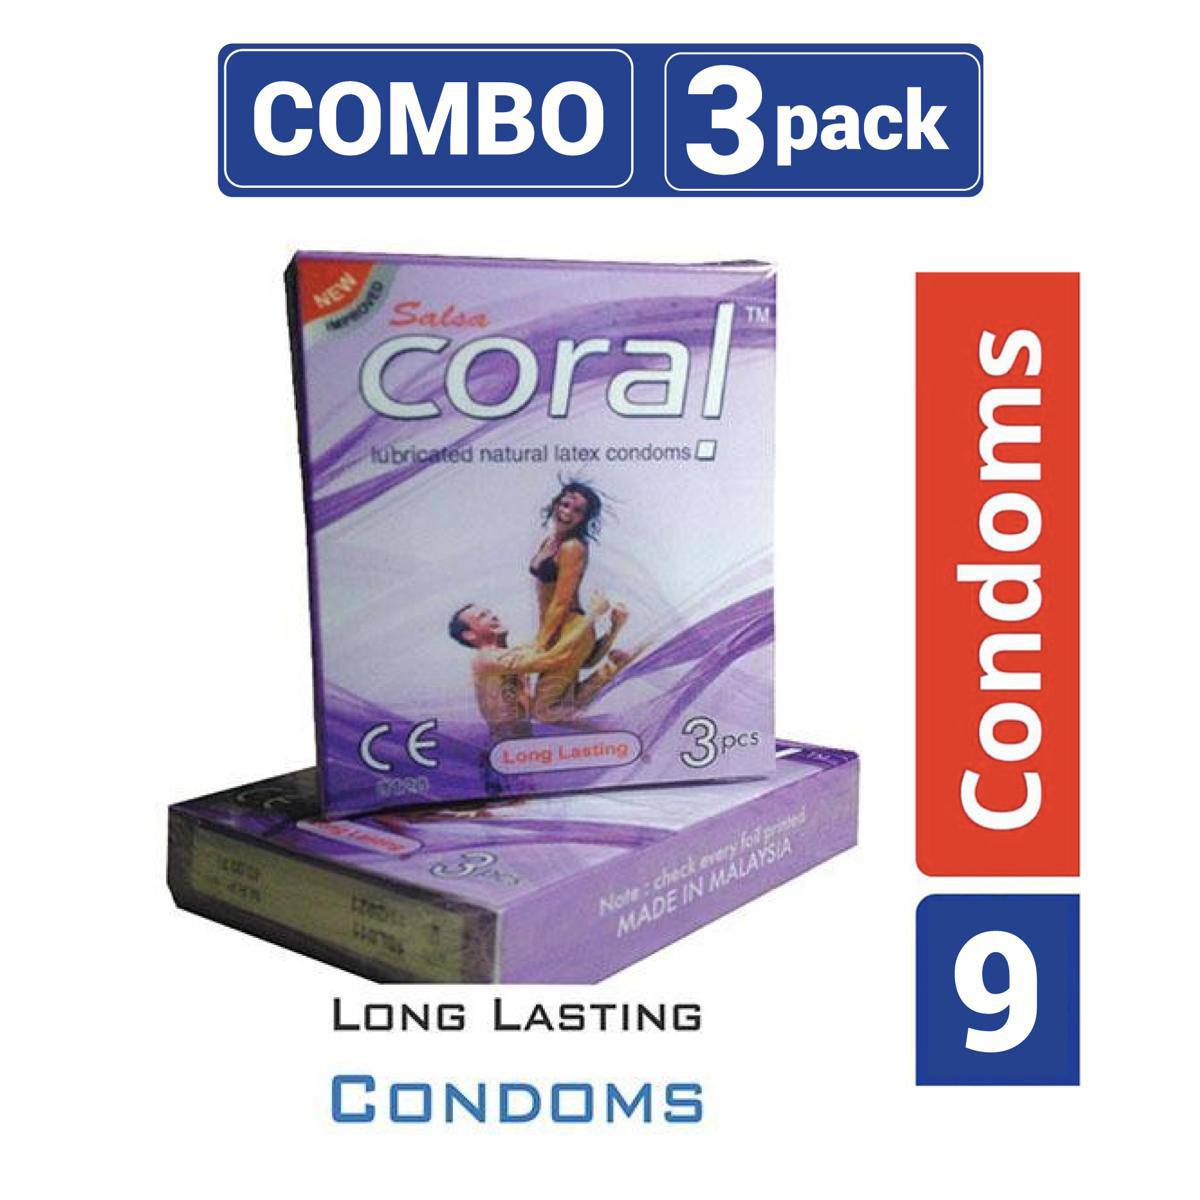 Coral Long Lasting Lubricated Natural Latex Condom 3packx3=9pcs